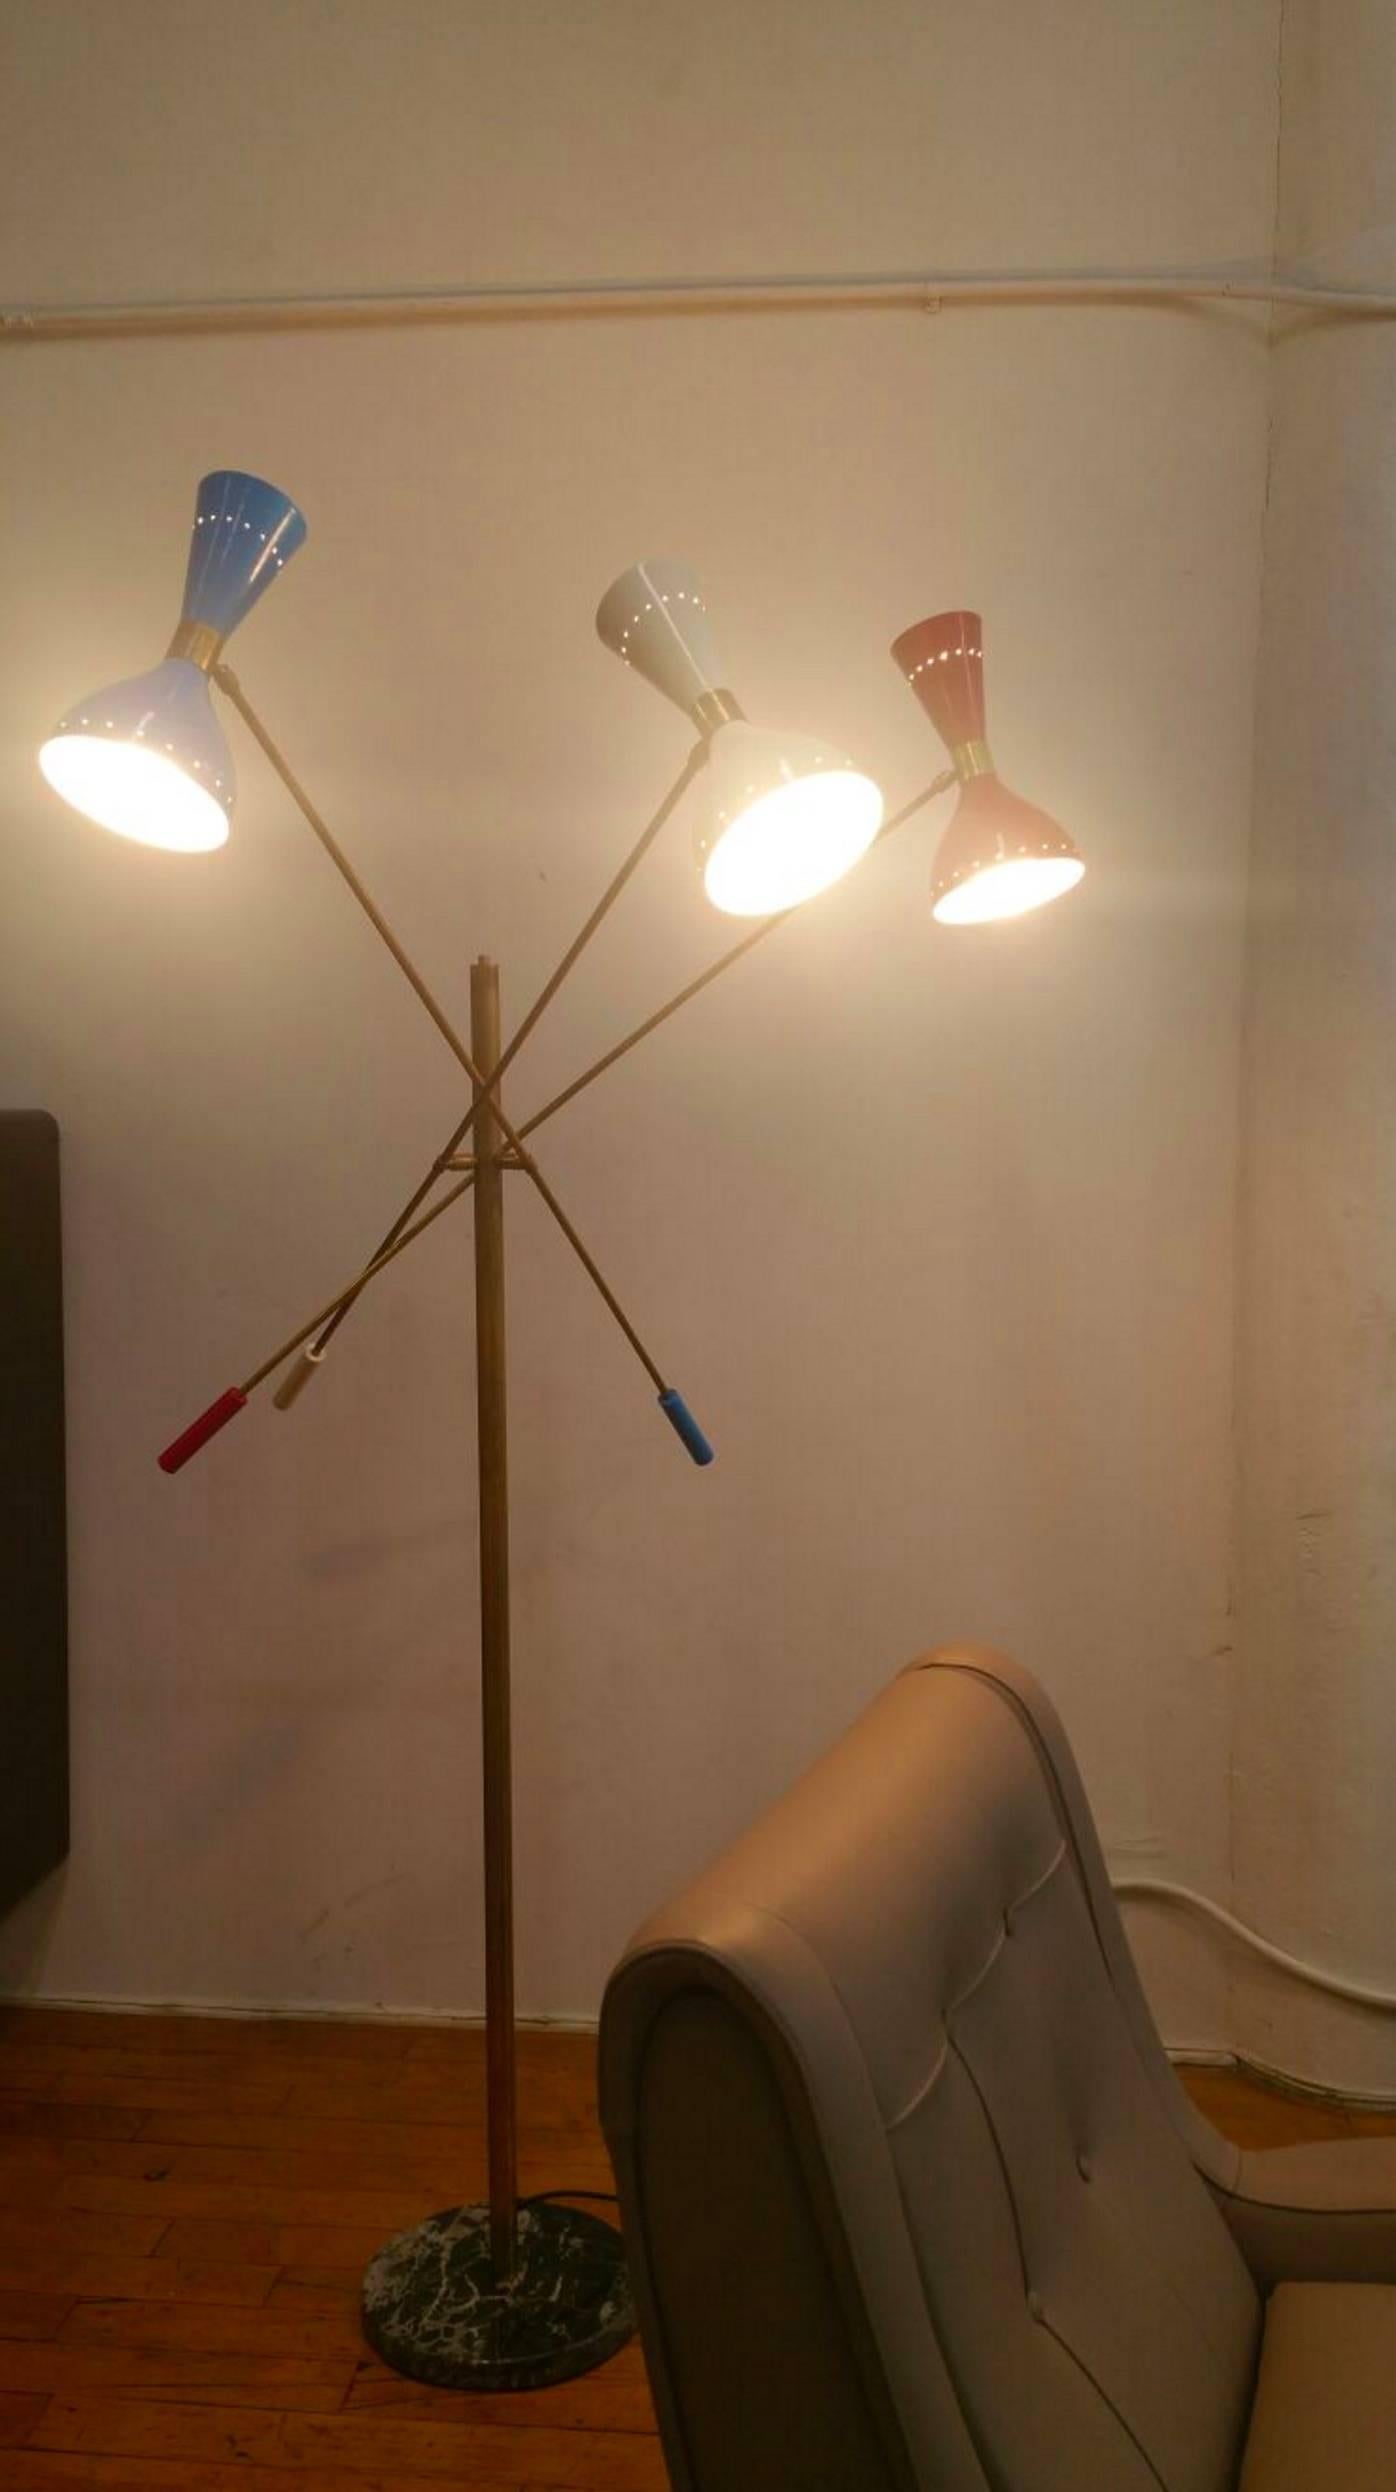 Italian Stilnovo style floor lamp with three arms movable and marble base, Triennale style, brass stem and colored cones white, blue and red. Rewired and ready to use, late 20th century. This floor lamp sizing is approximate as the arms move and you